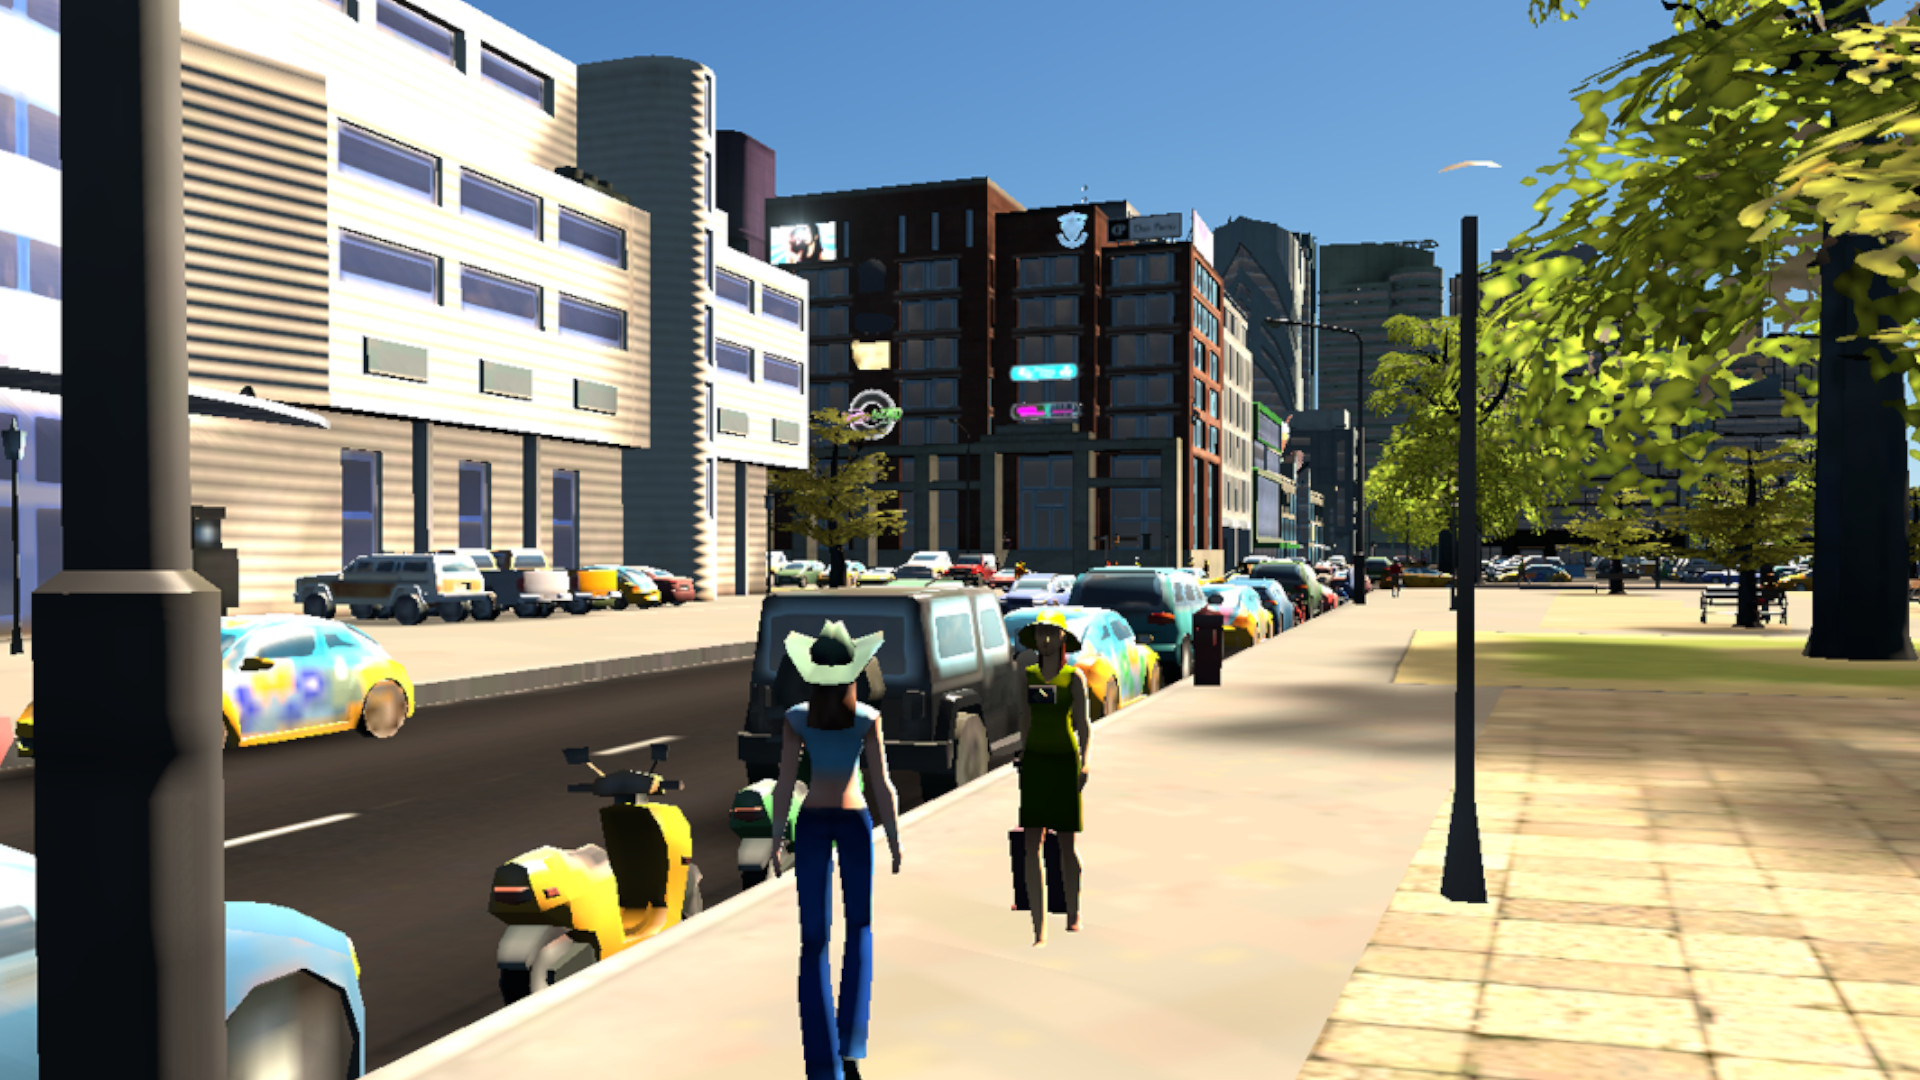 Work-in-progress Cities: Skylines mod brings first-person multiplayer